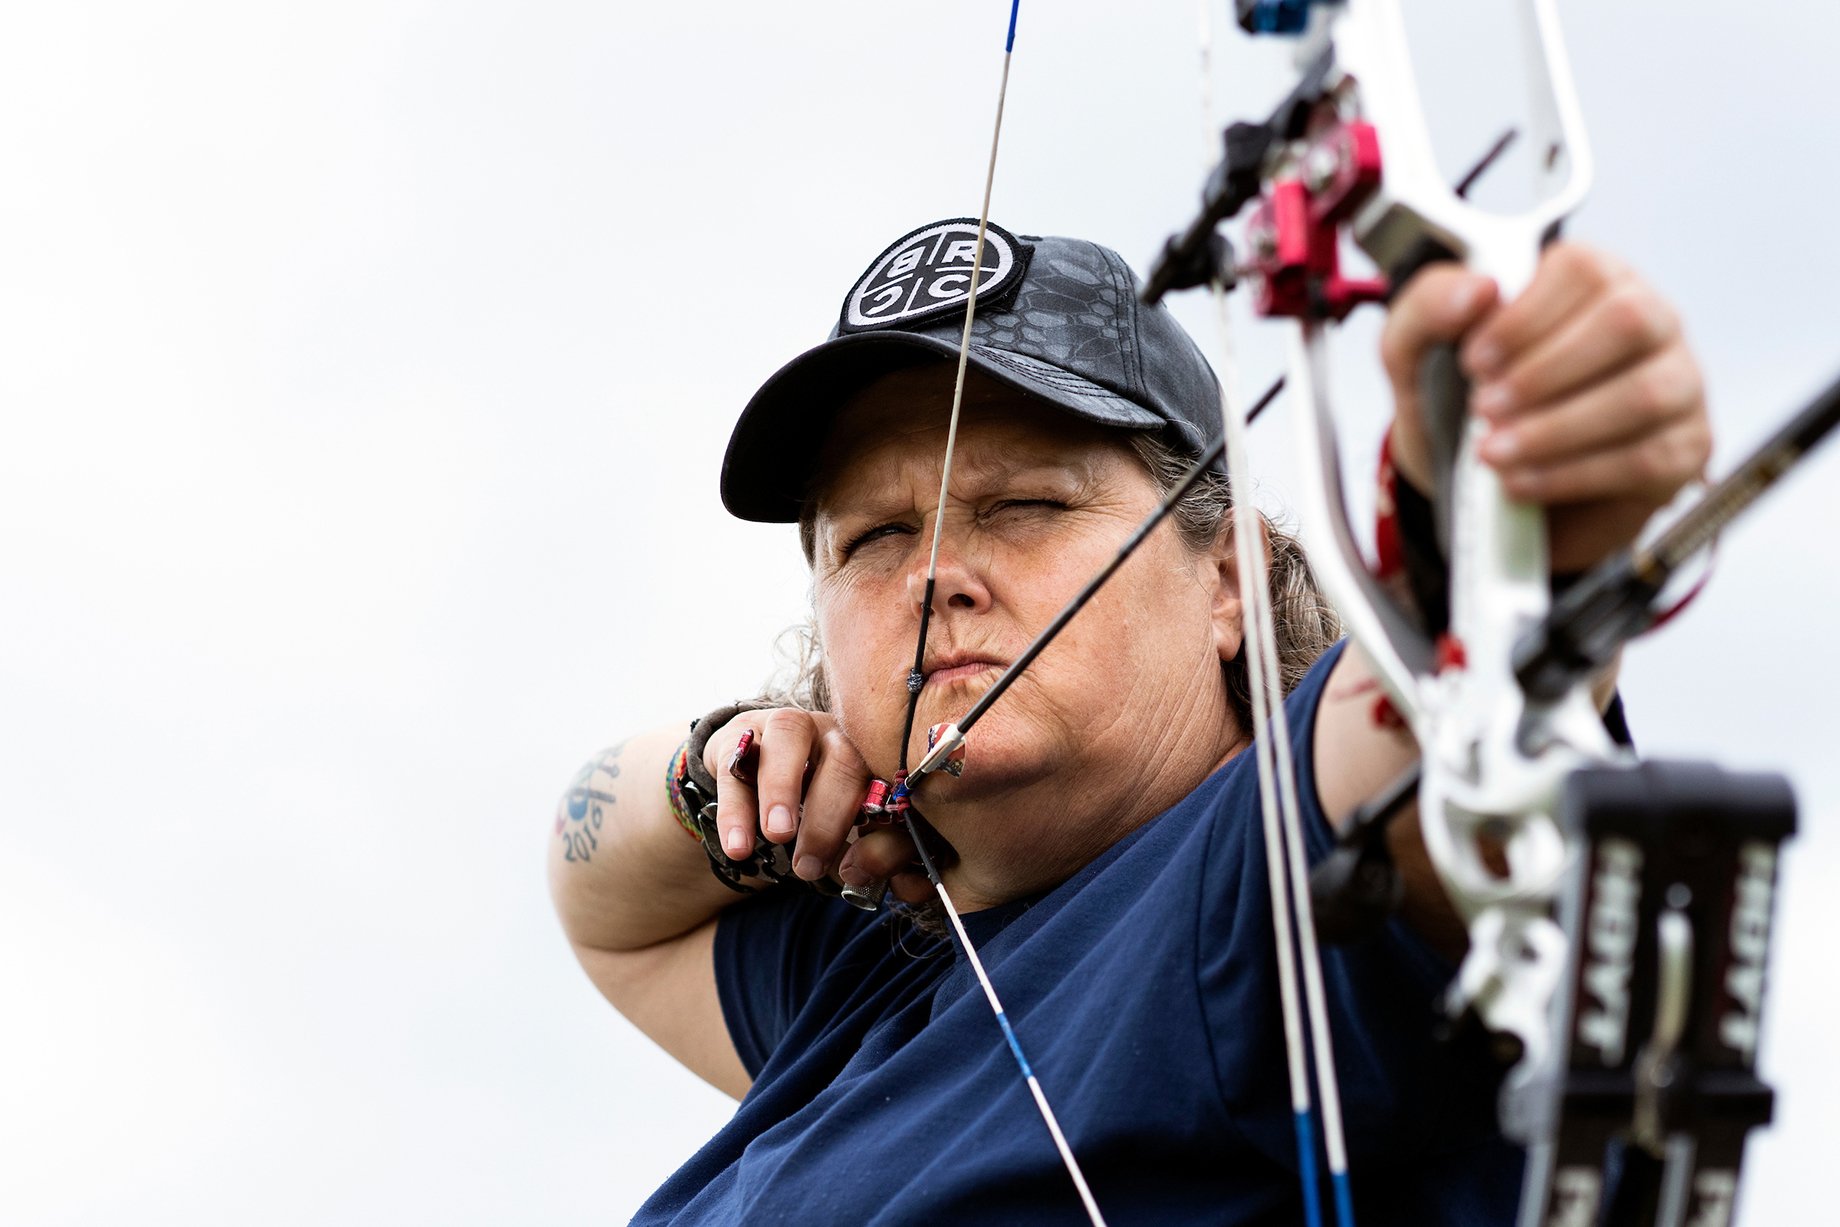 Paralympic archer Lia Coryell takes aim shot by Lauren Justice for the New York Times